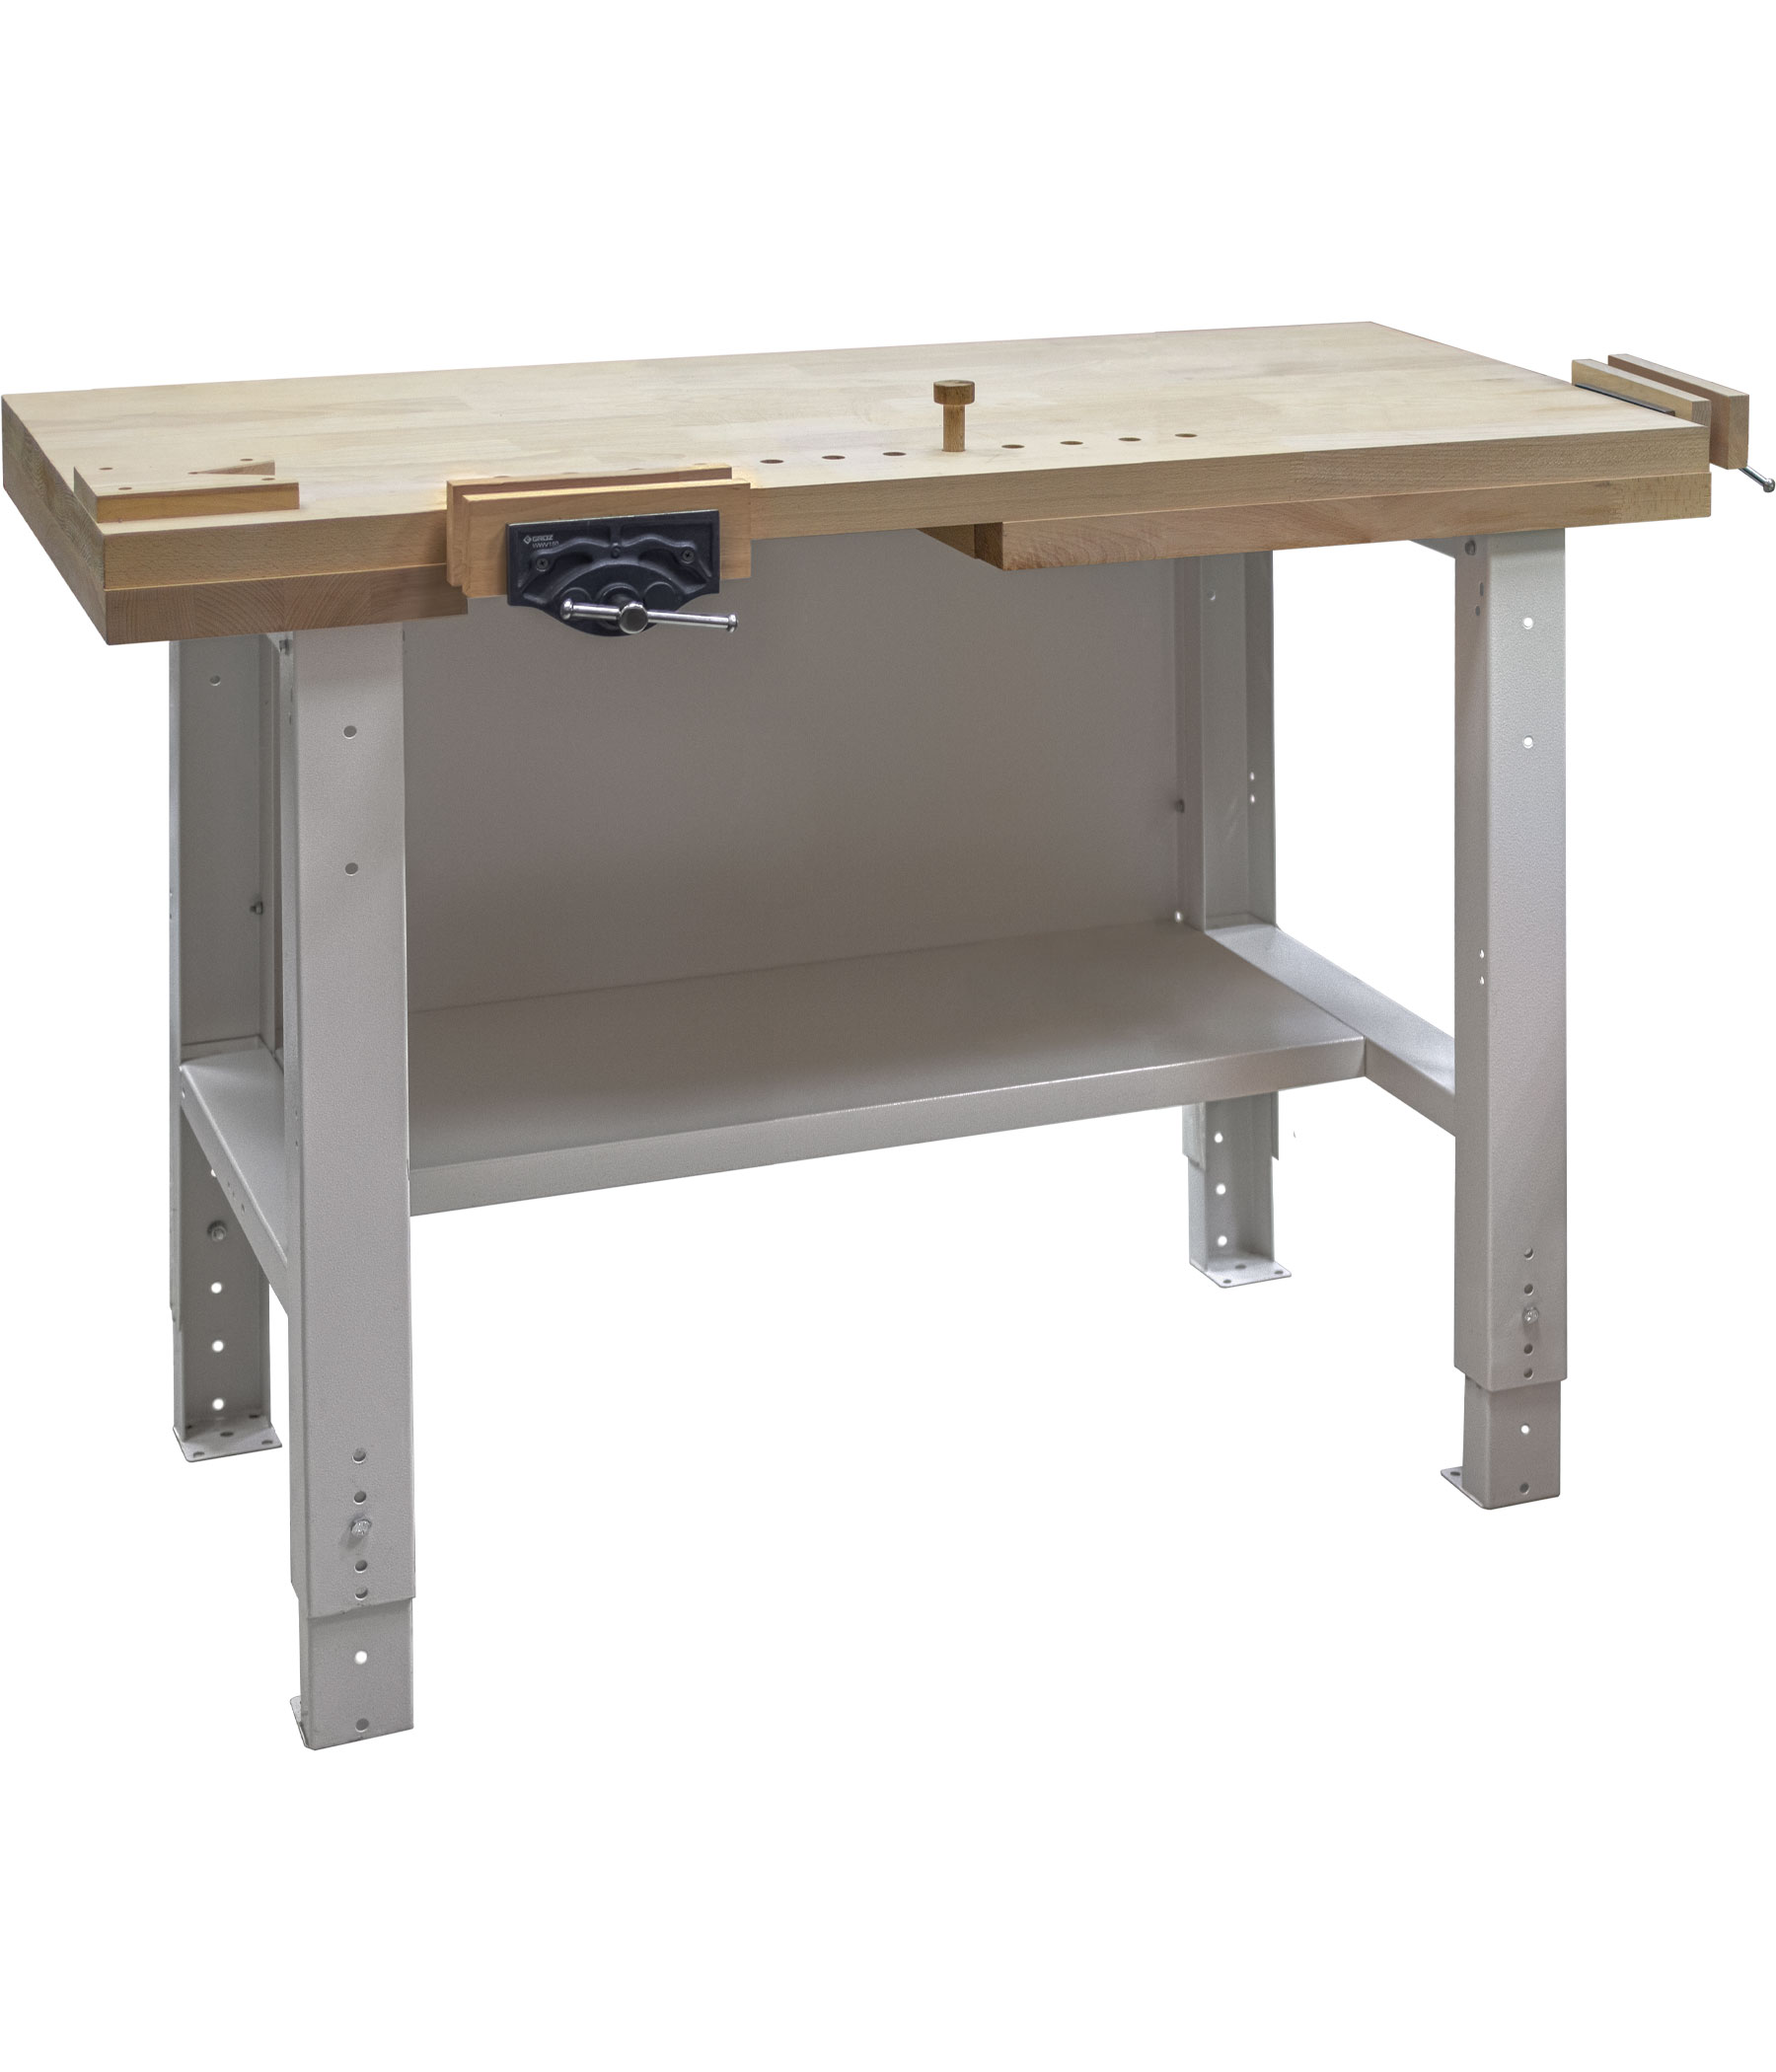 Joiner workbench VS 21 FV/SV with front and side vice pack